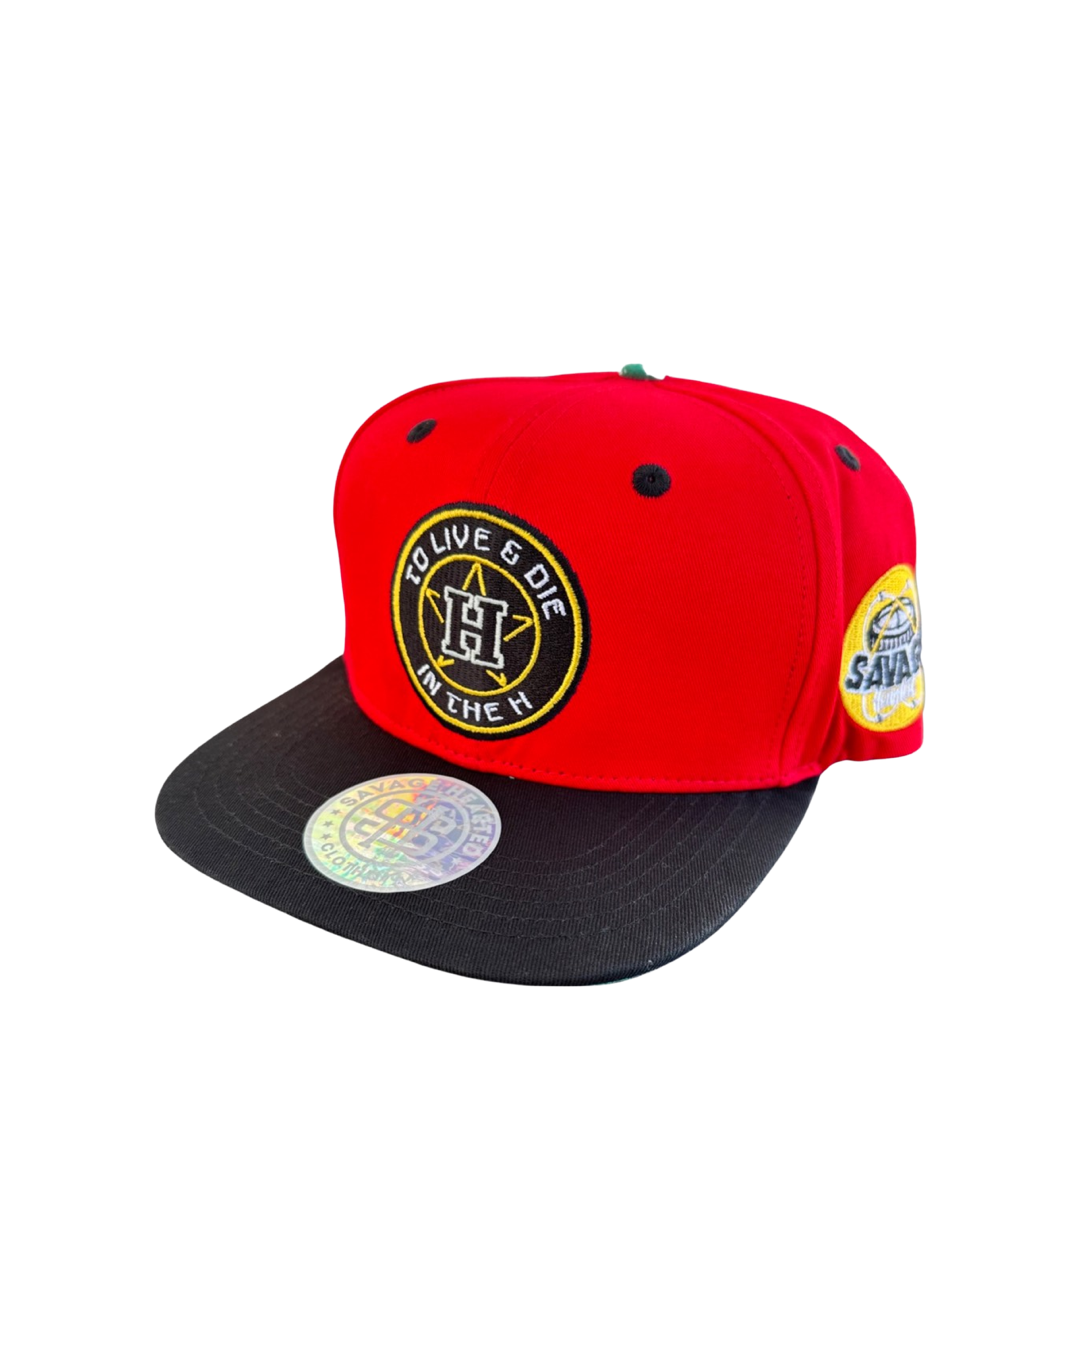 2L&DITH red Snapback hat